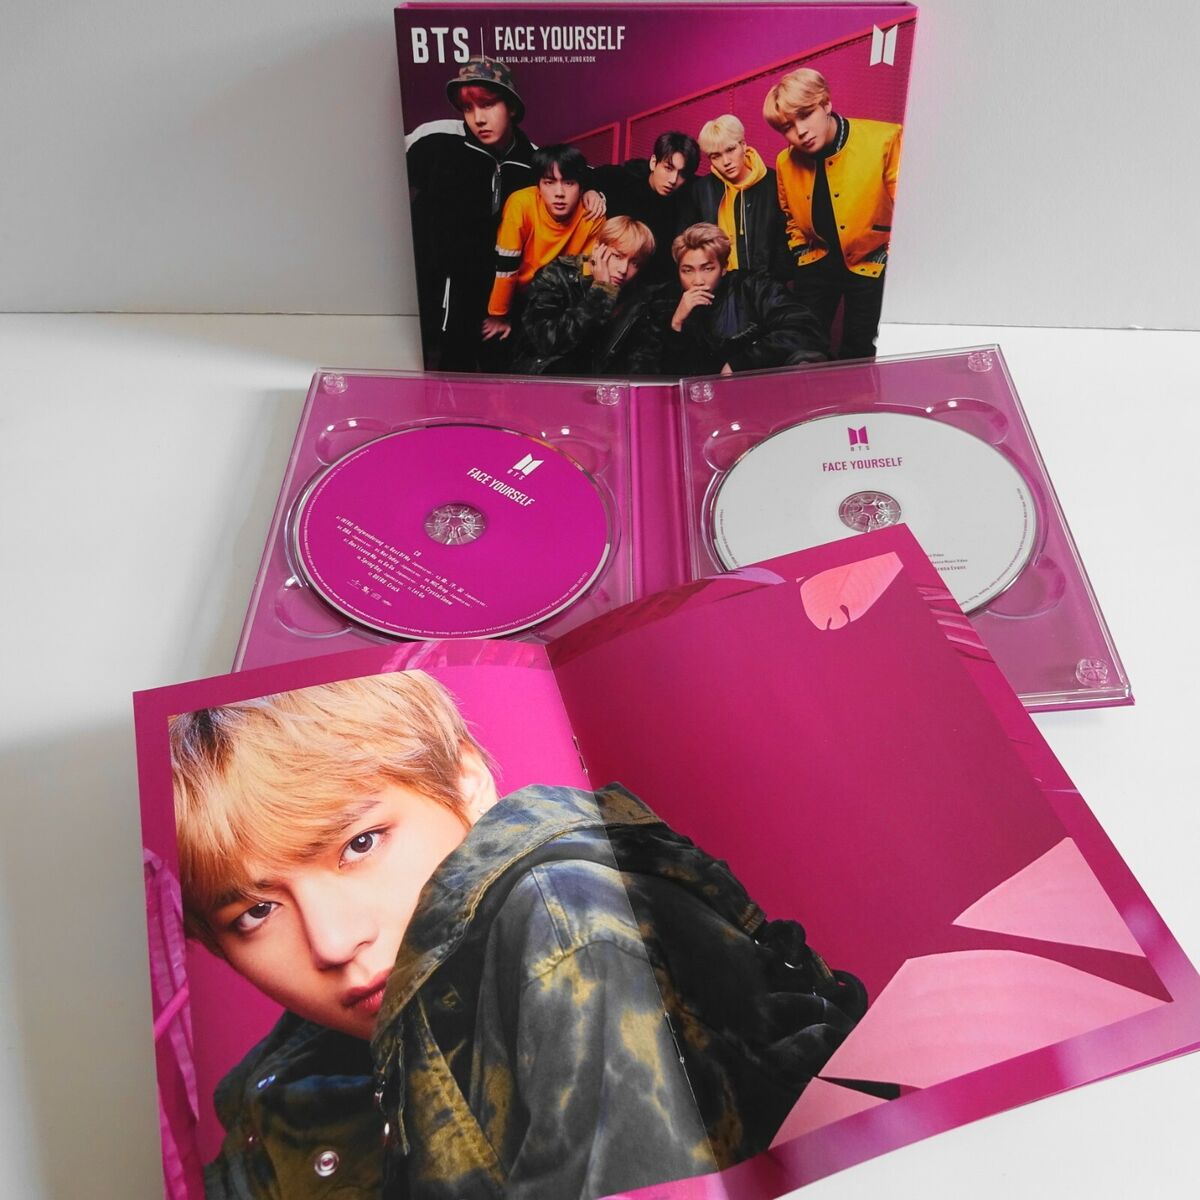 BTS FACE YOURSELF JAPAN CD+DVD (First Limited Edition B) eBay